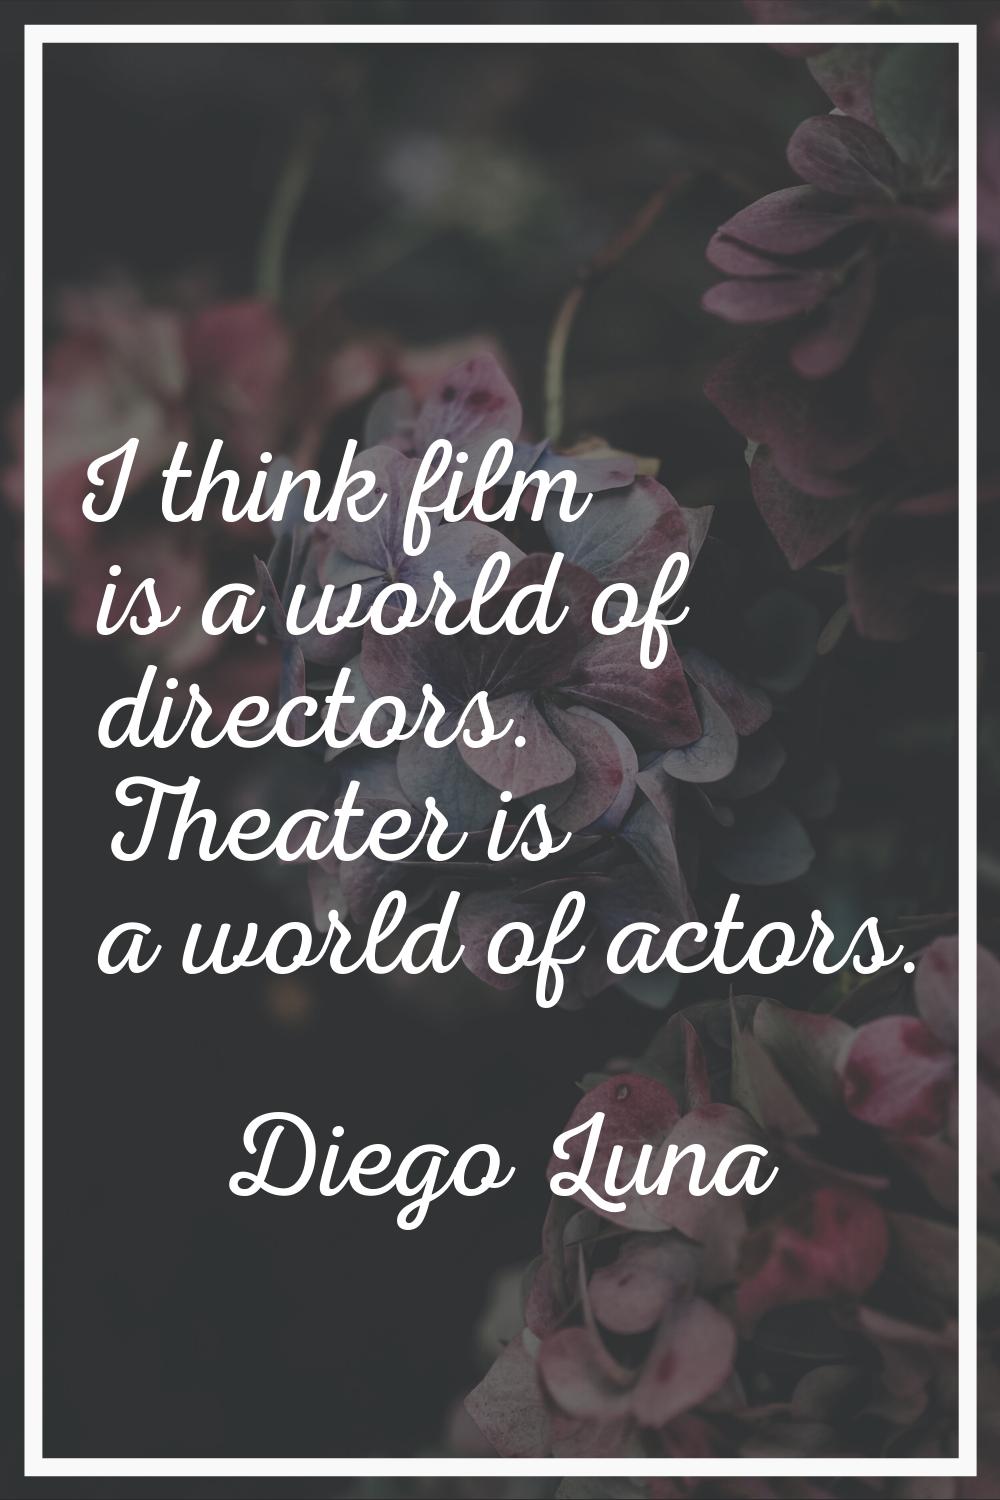 I think film is a world of directors. Theater is a world of actors.